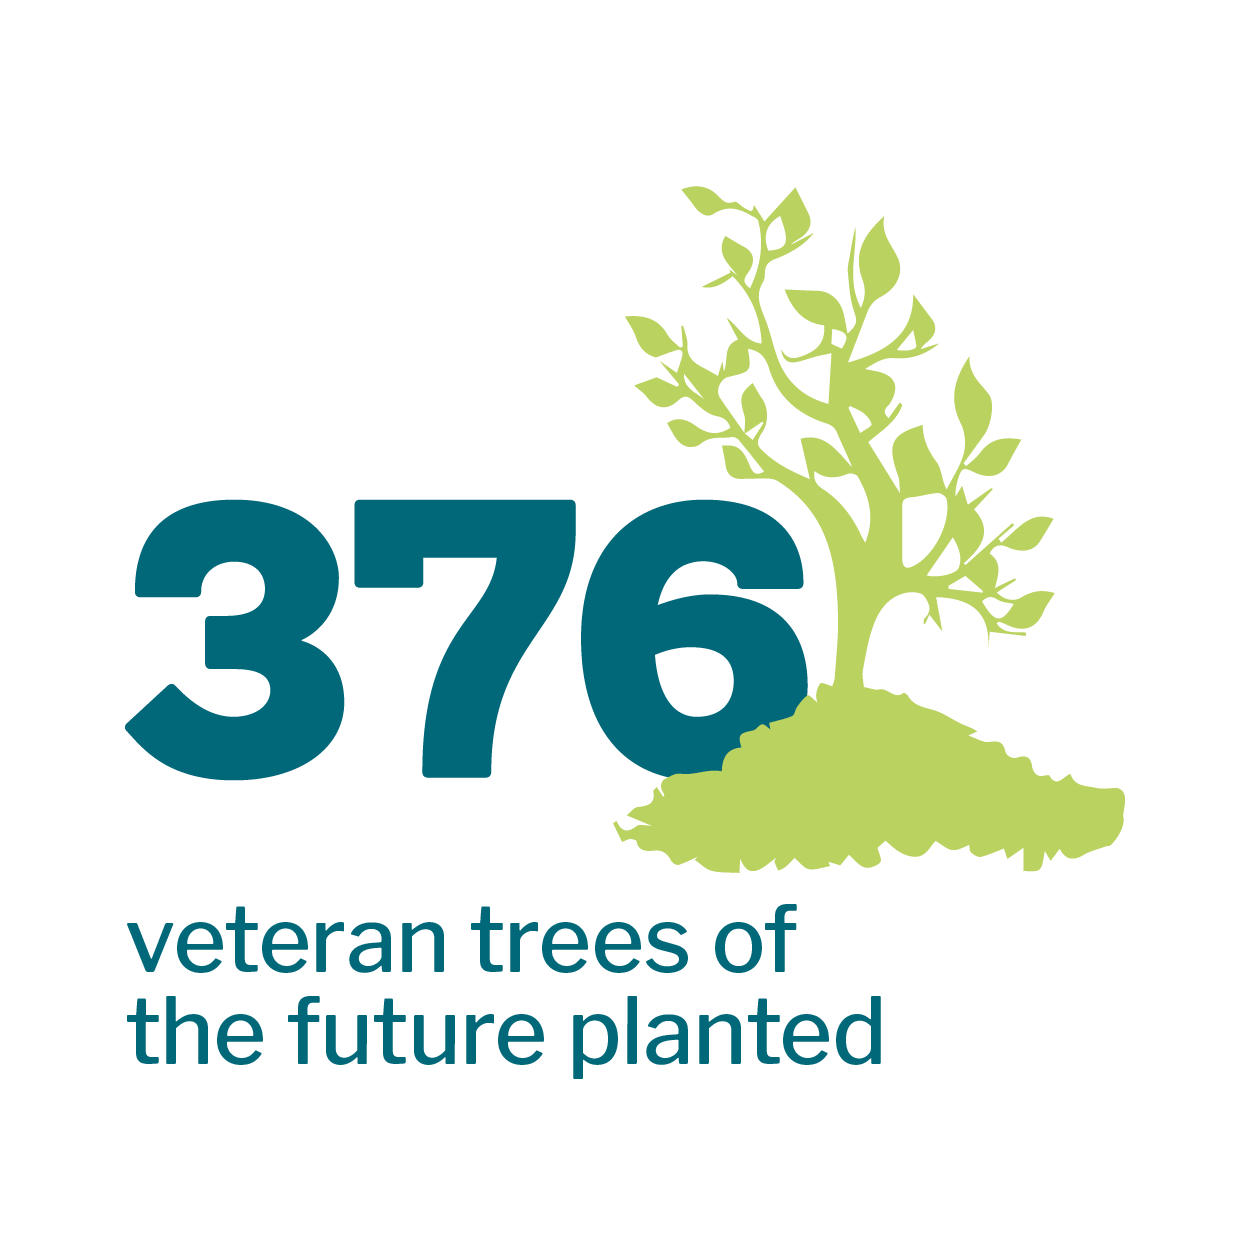 Tree planting icon that reads: 376 veteran trees of the future planted